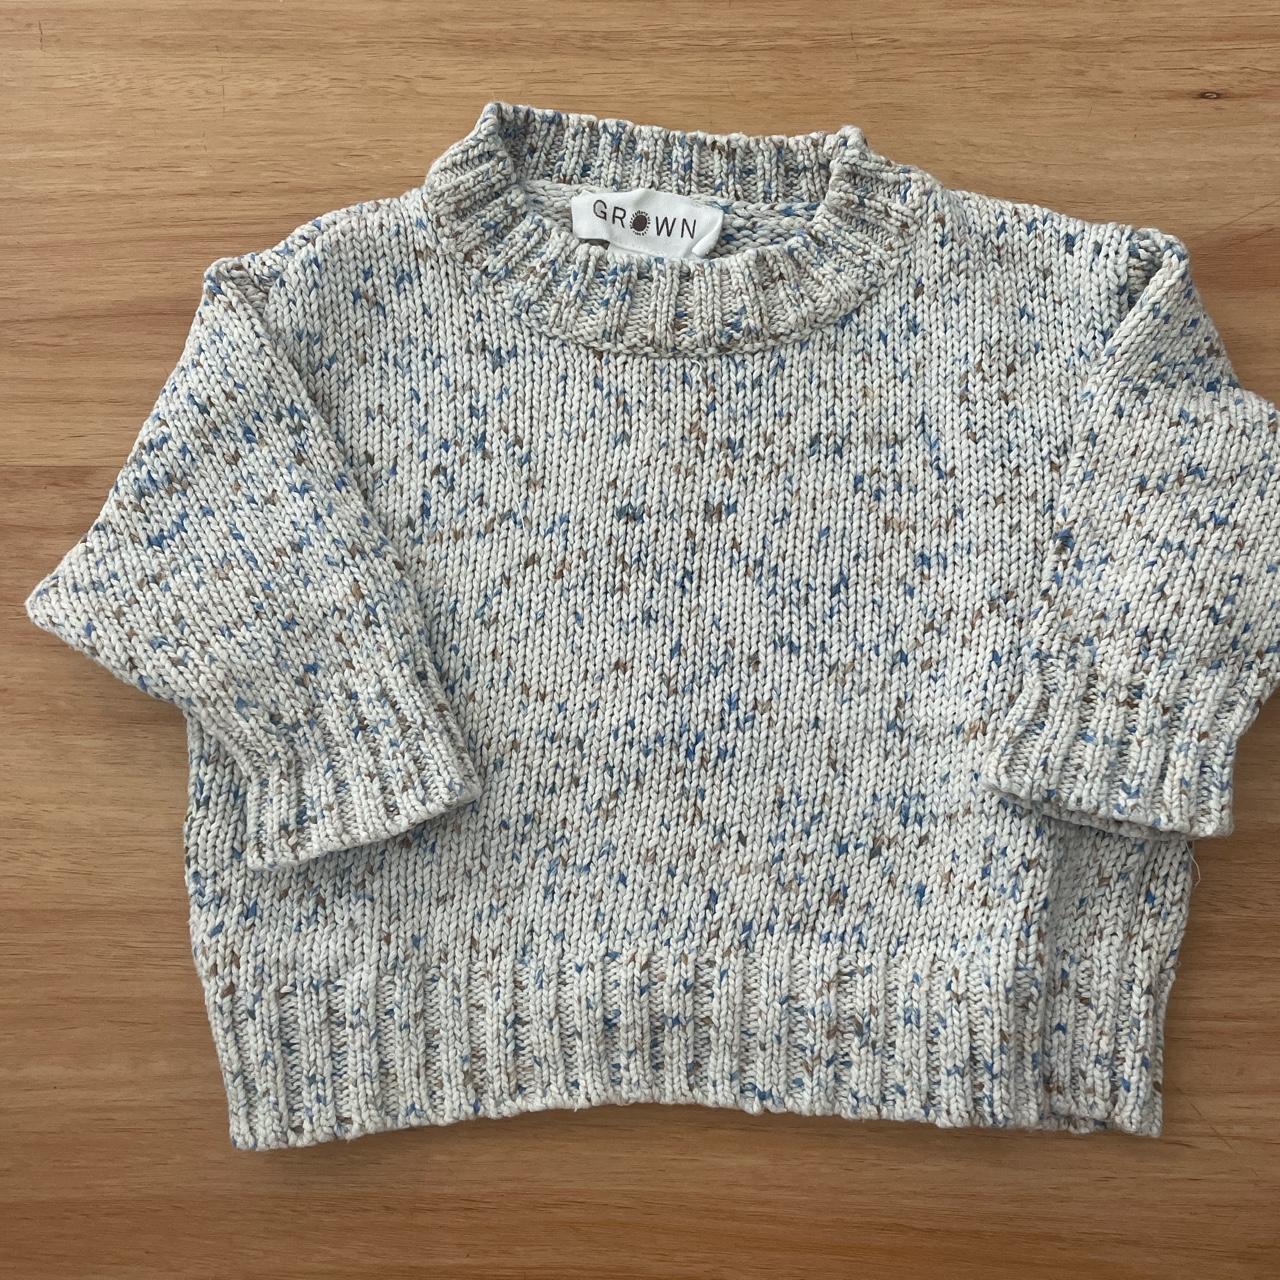 Grown - 3-6 months (Size 00) Blue and brown speckled... - Depop